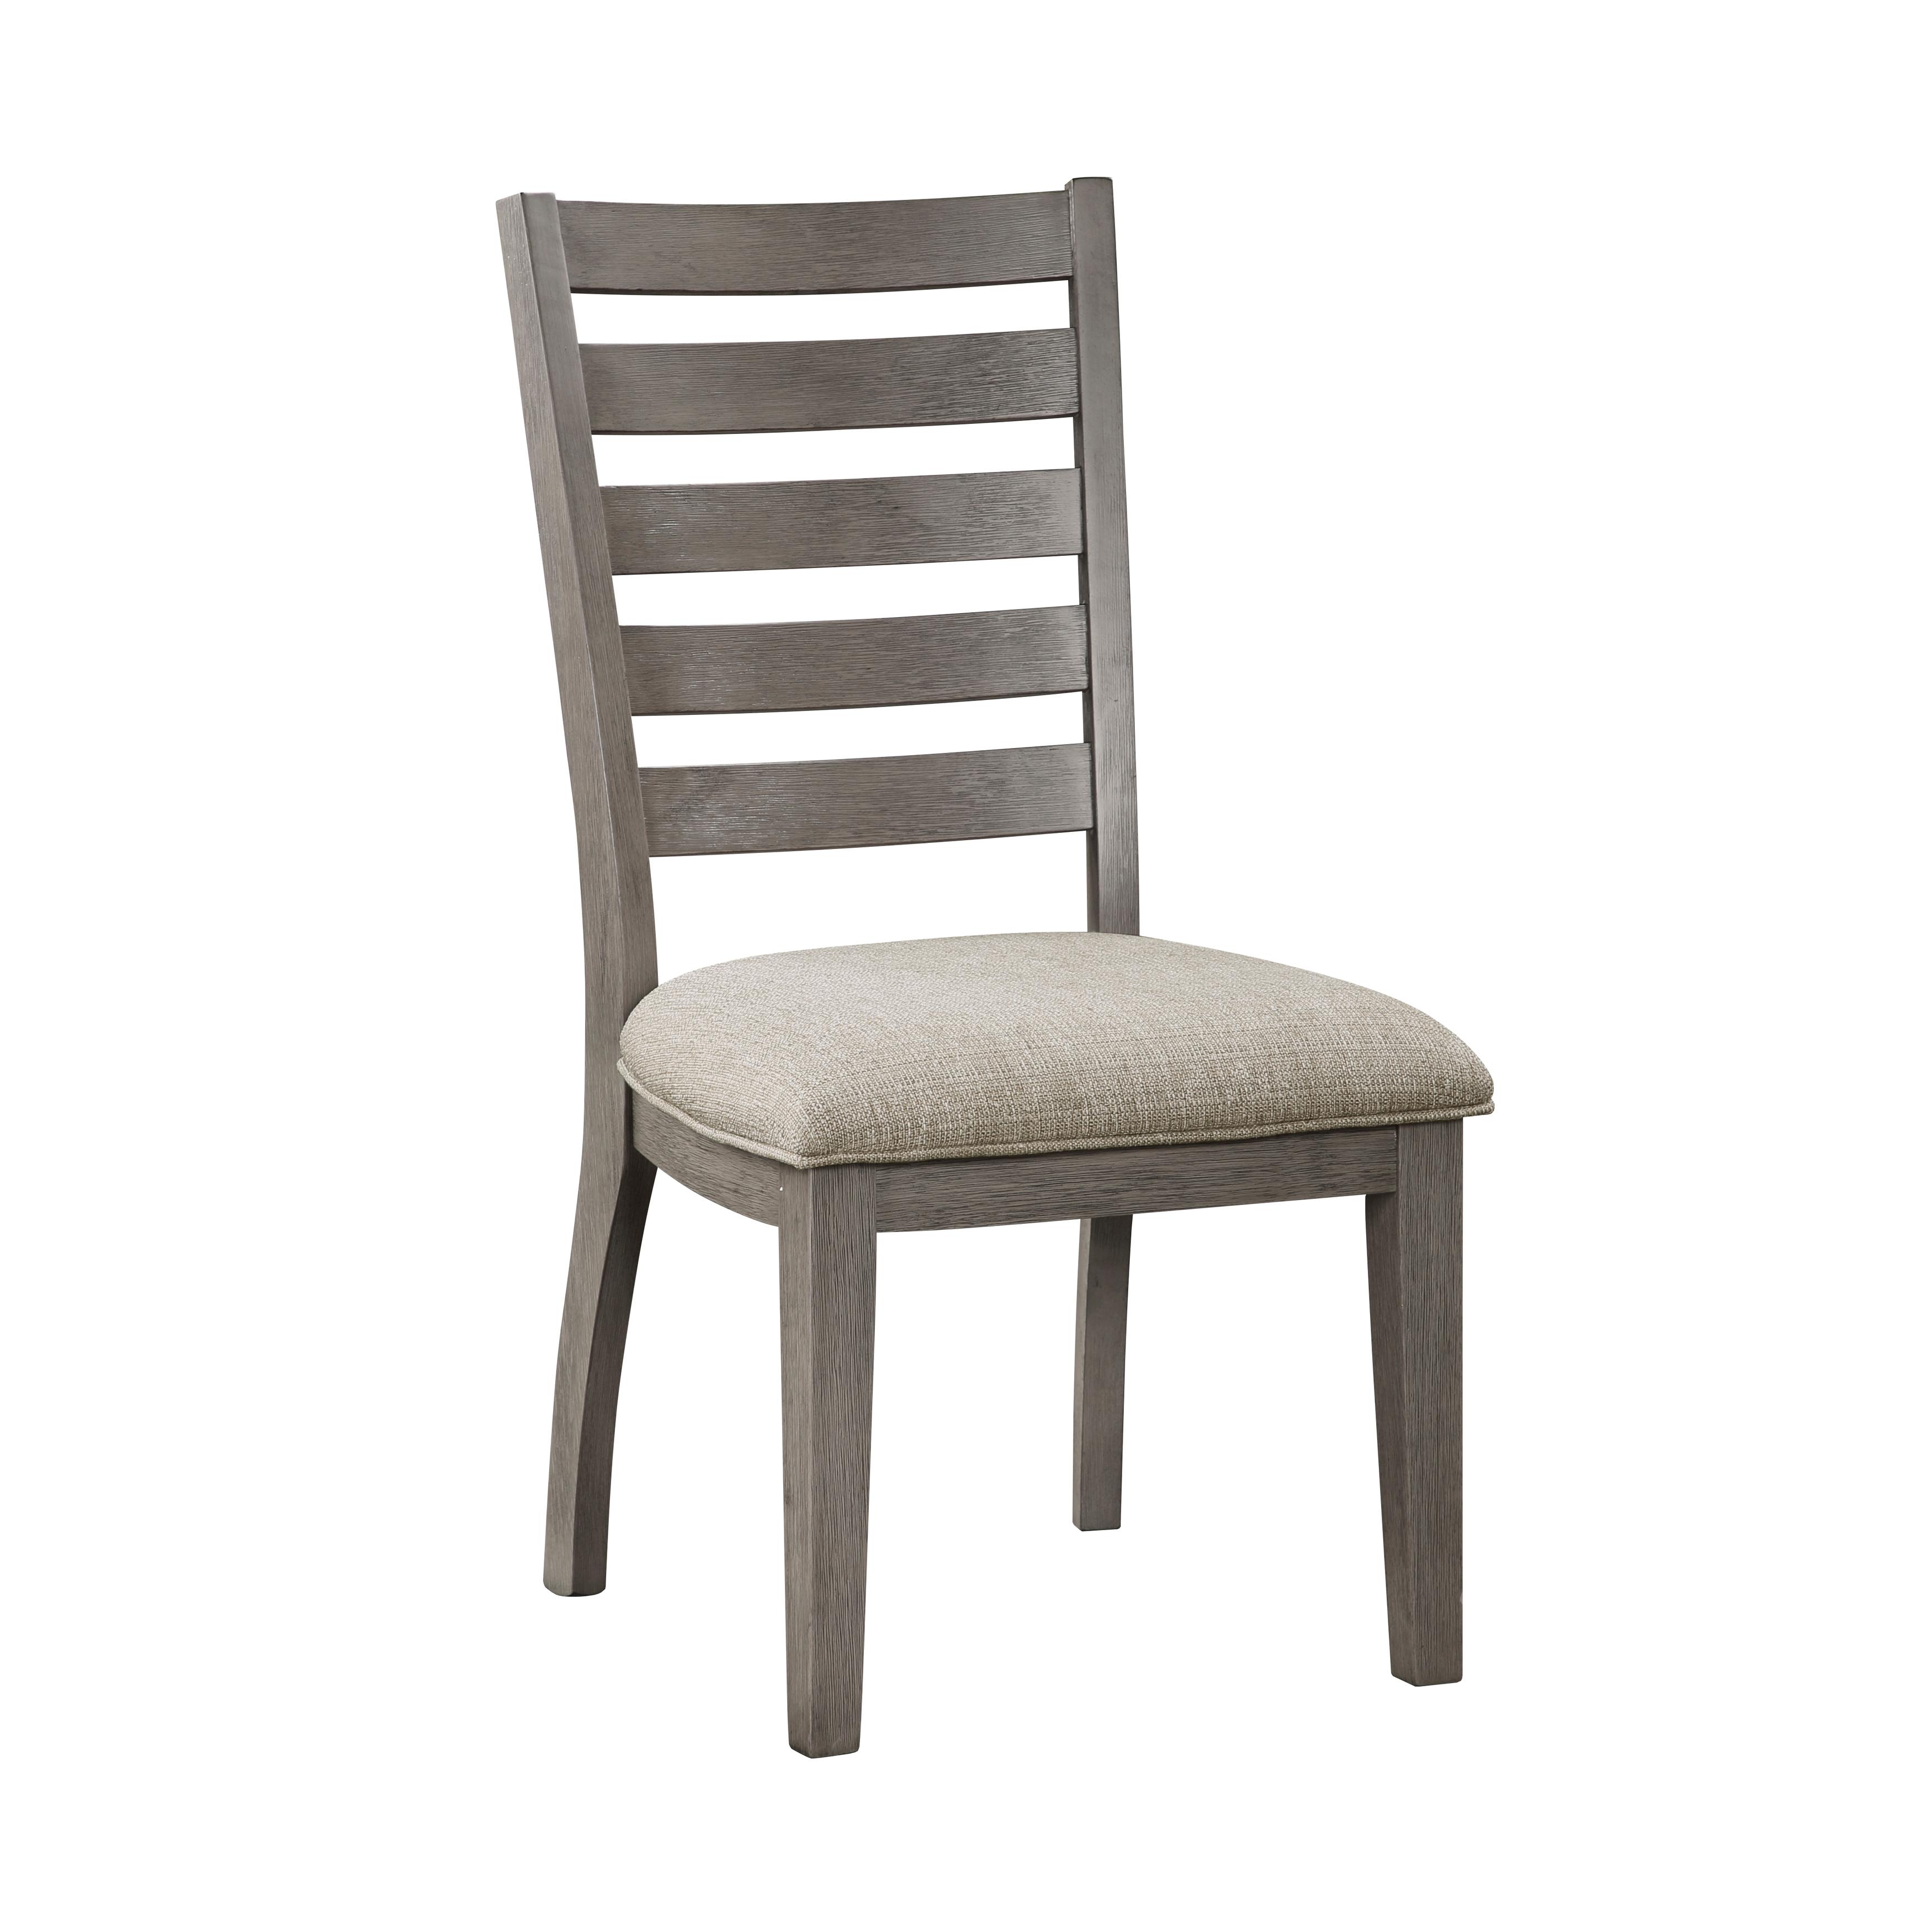 Modern, Traditional Side Chair Set Tigard Side Chair Set 2PCS 5761GYS-2PCS 5761GYS-2PCS in Gray, Beige Fabric